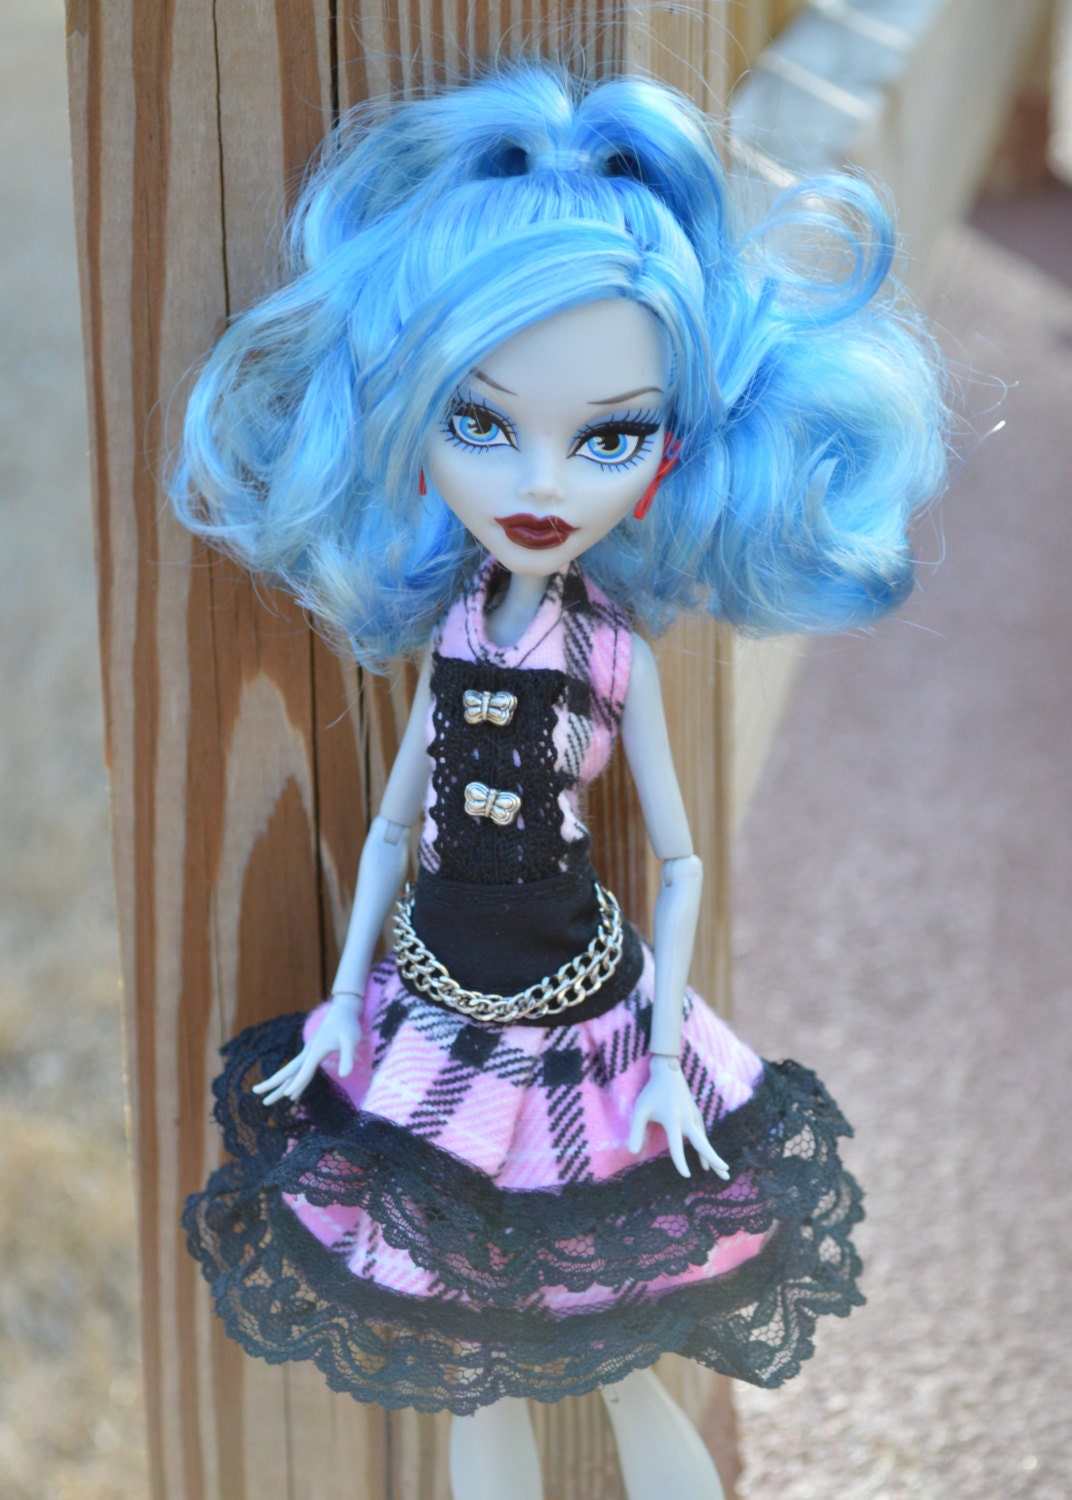 Black and Pink Plaid Monster High Doll Dress by DropDeadFashions